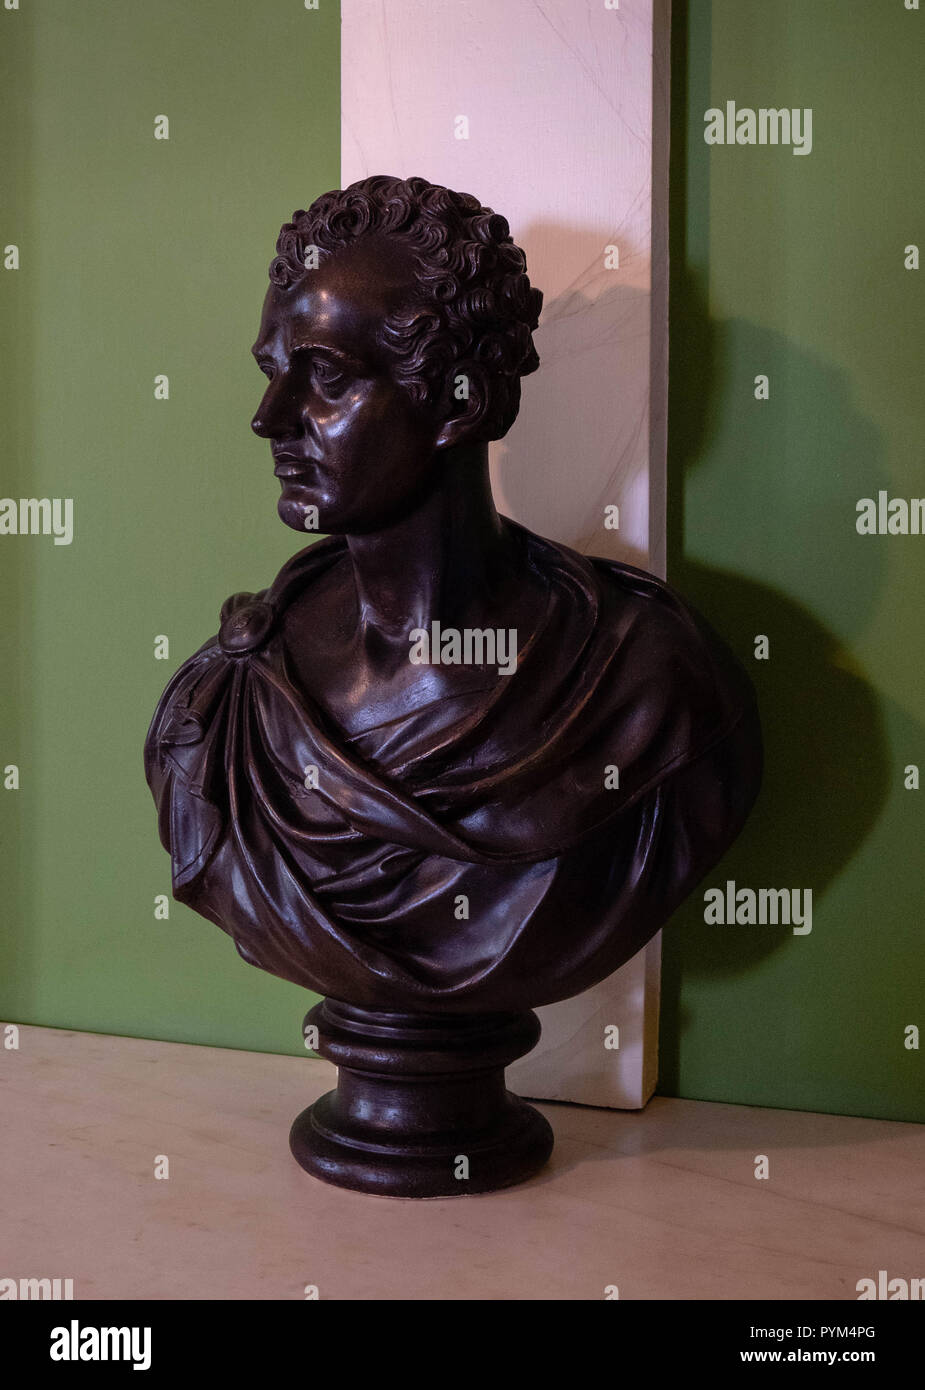 Bronze bust of George Gordon Lord Byron English poet and adventurer in the entrance hall of the Owens Thomas house museum in Savannah Georgia USA Stock Photo